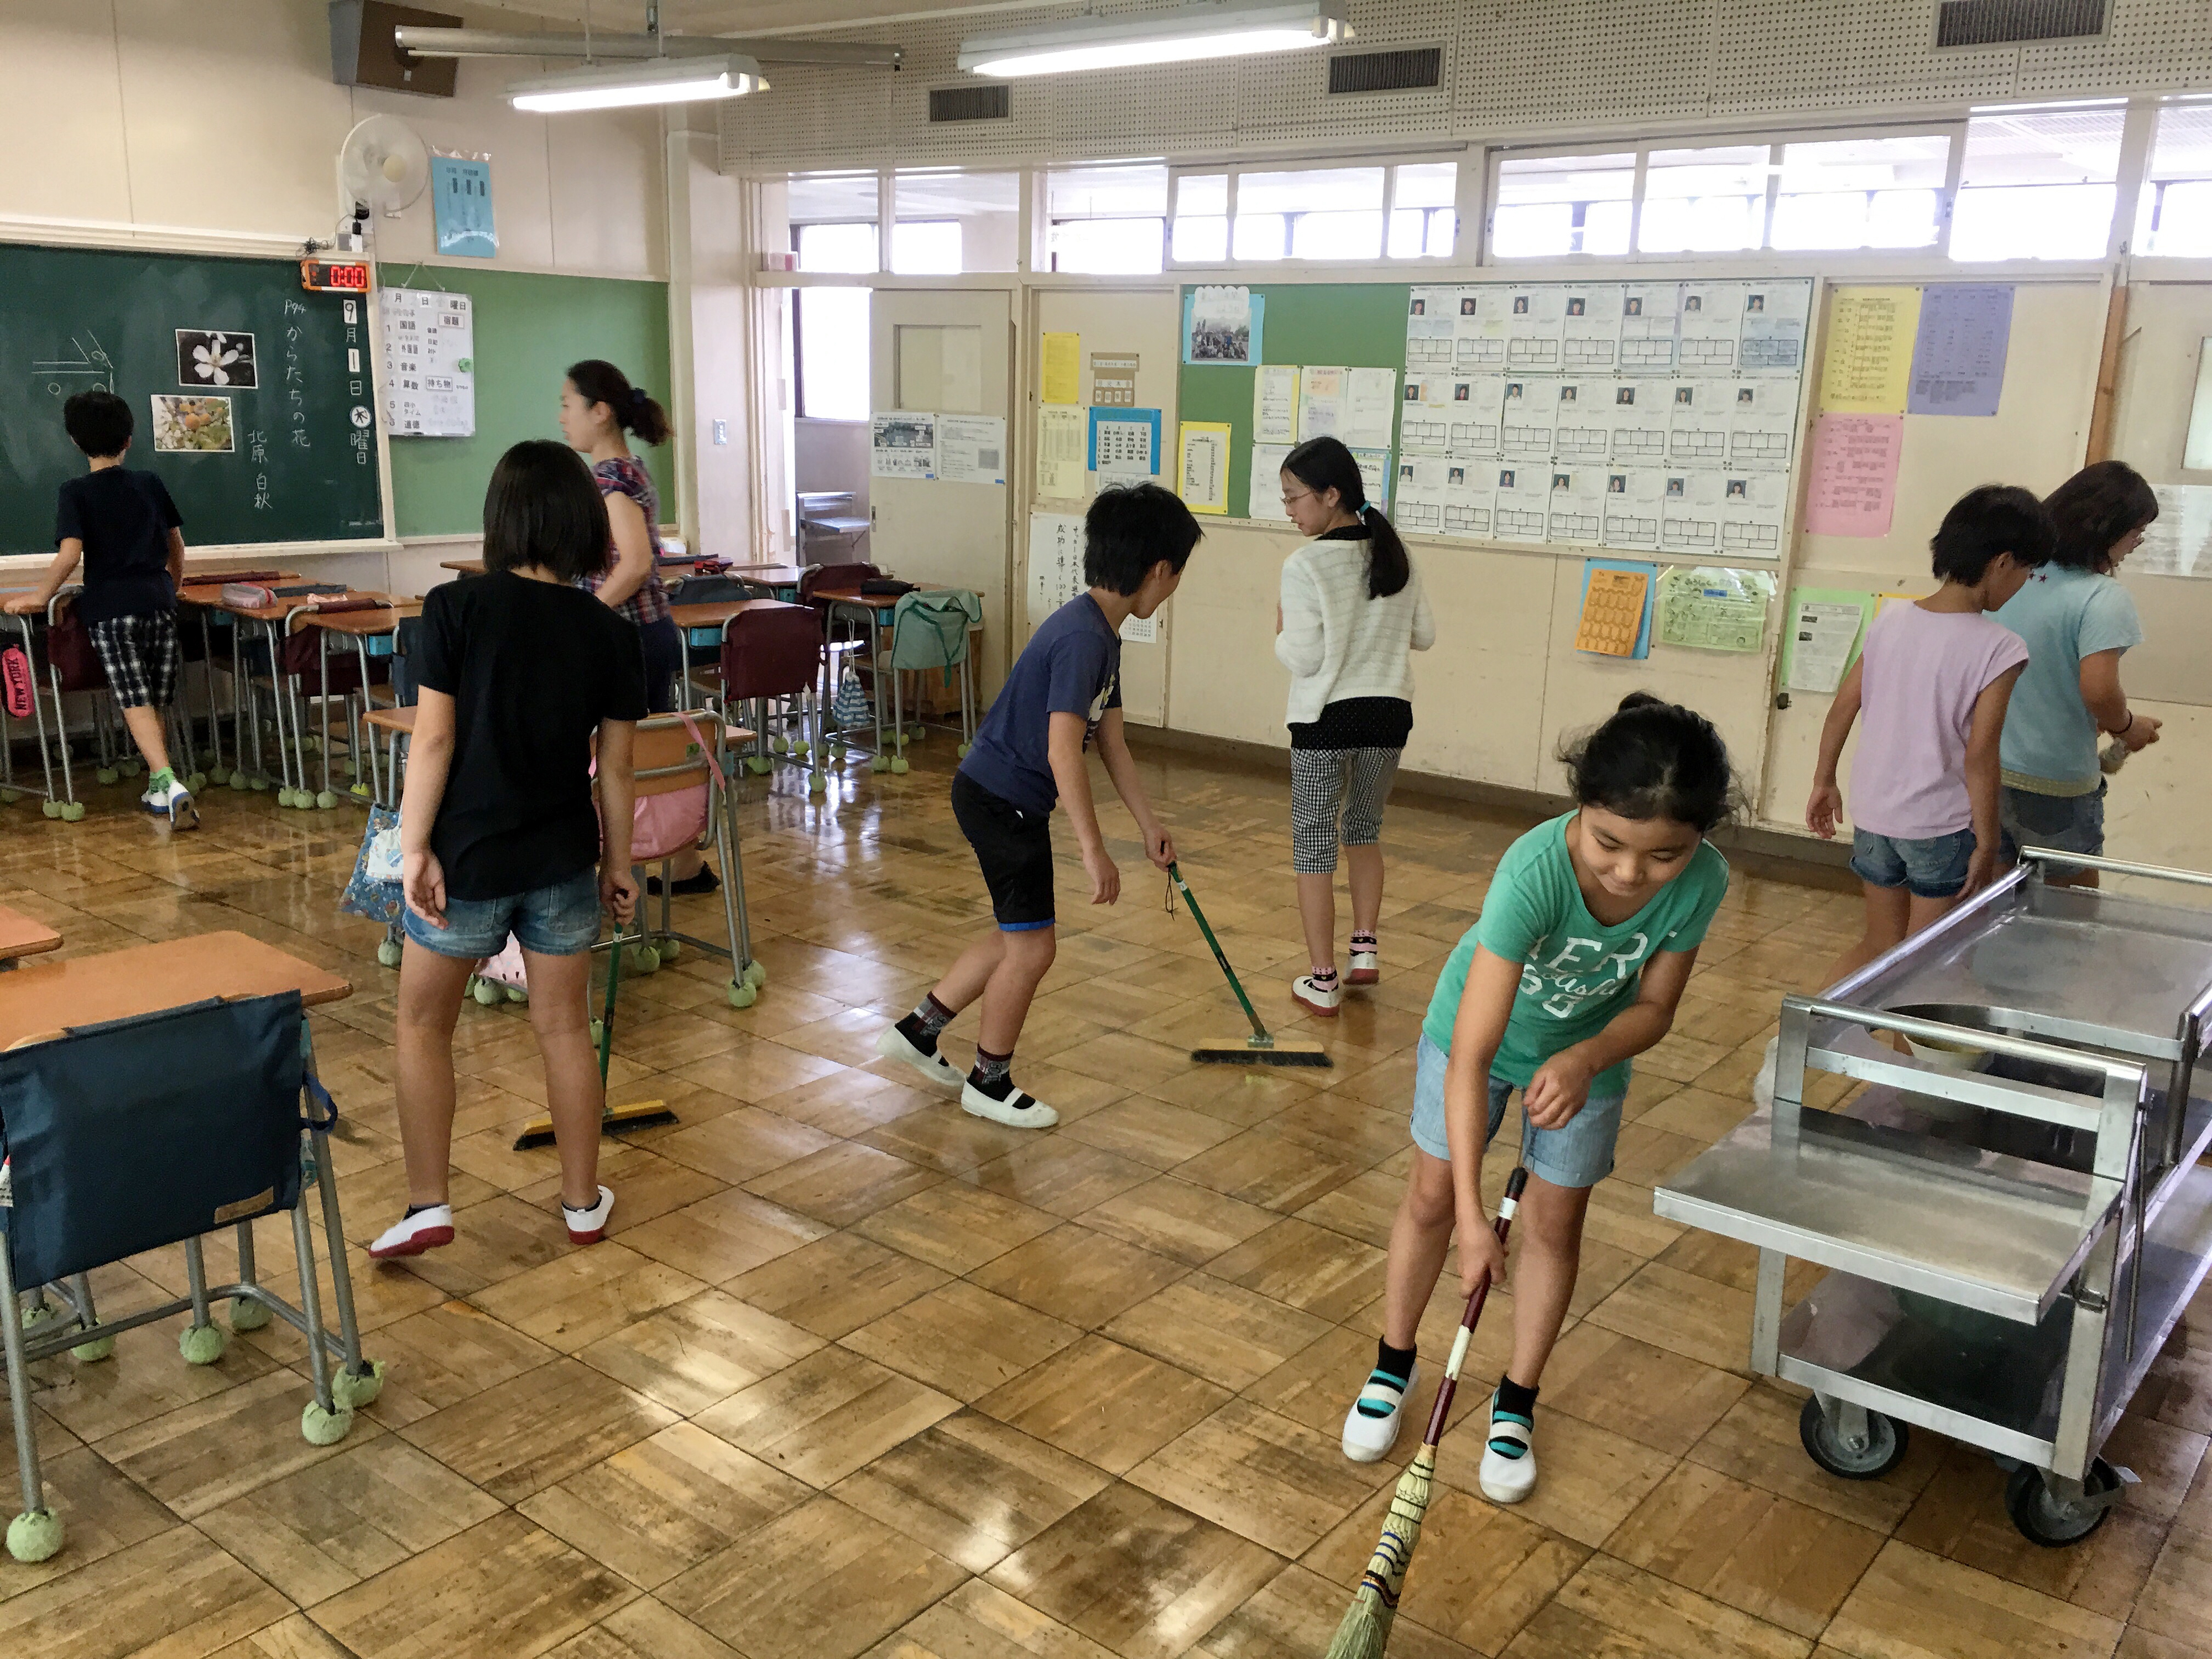 Students participate in cleaning a classroom with brooms and cloths